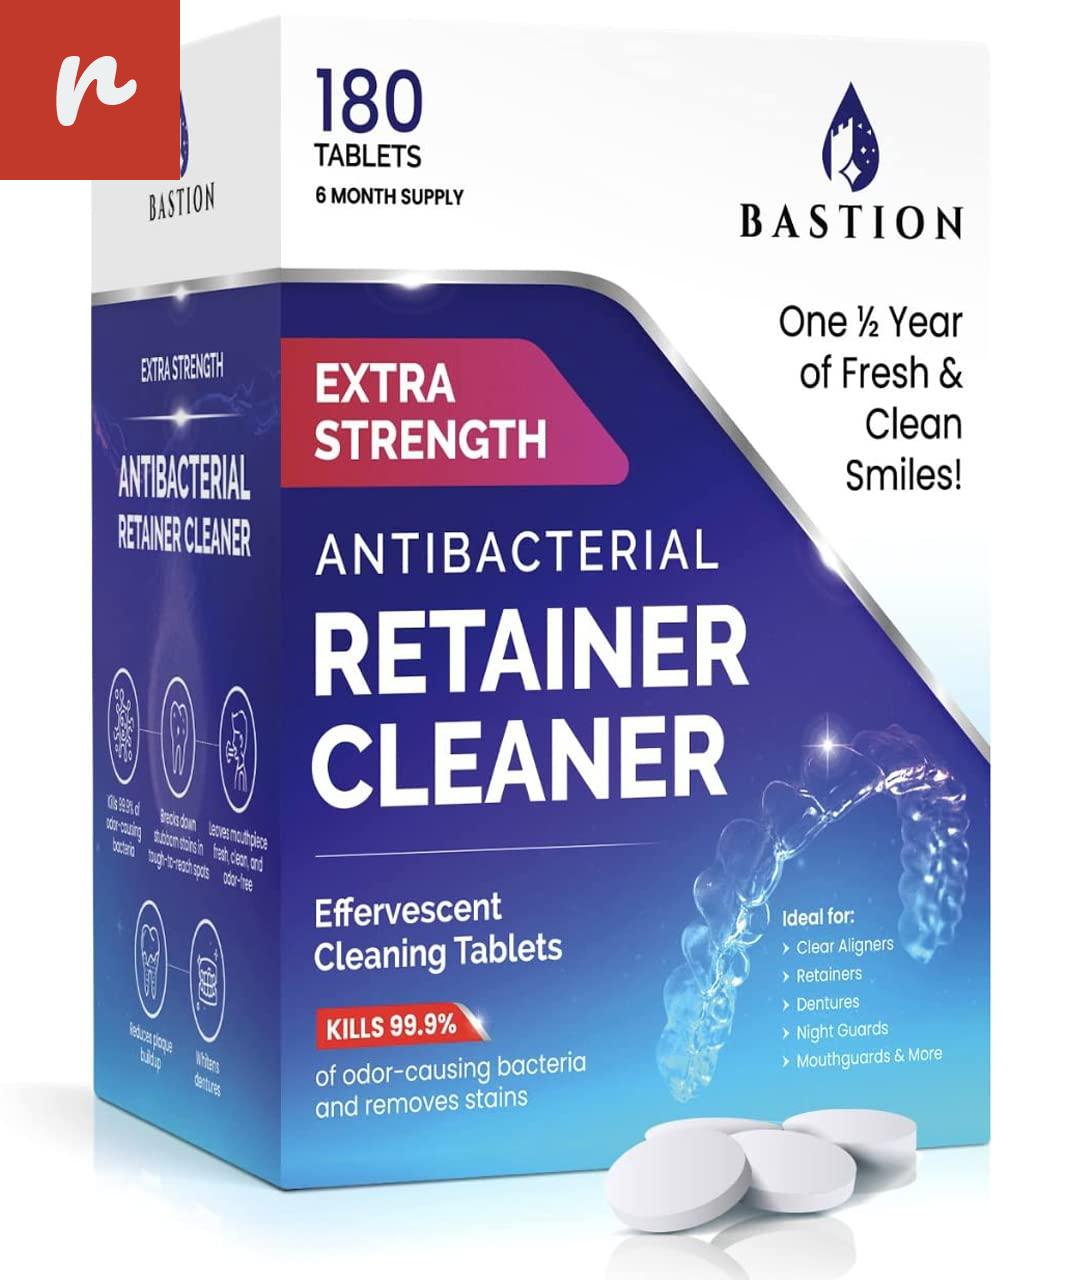 How to Choose the Right Retainer Cleanser for You